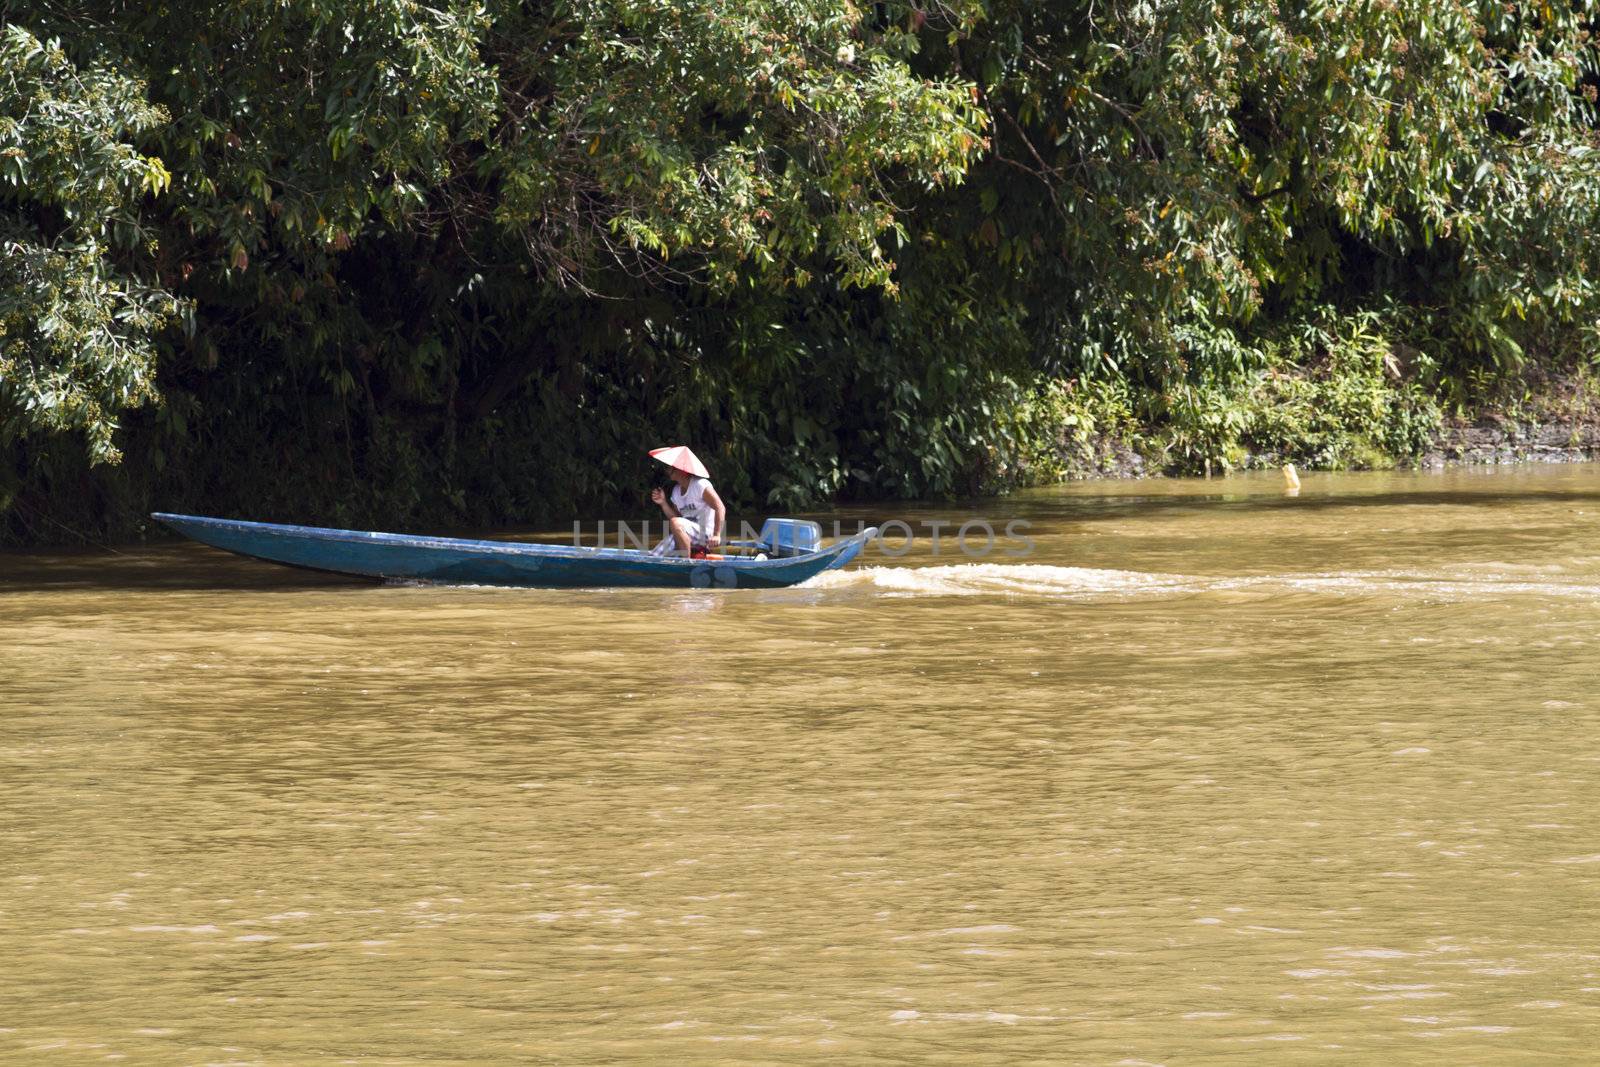 One fisherman using a speed boat on a fishing attempt in Sungei Rajang, Sarawak Malaysia